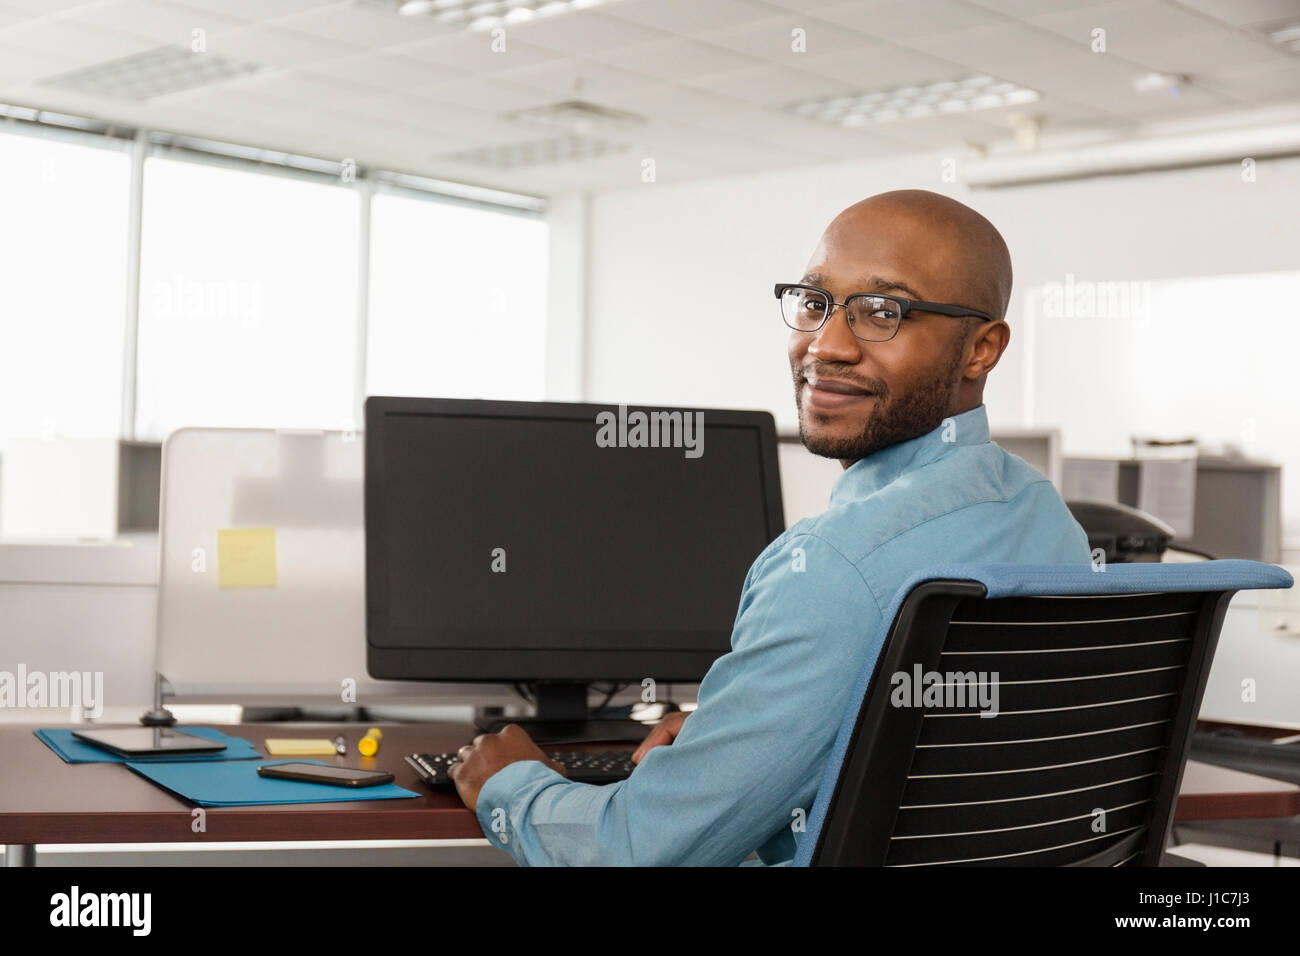 Smiling African American man using computer in office Stock Photo